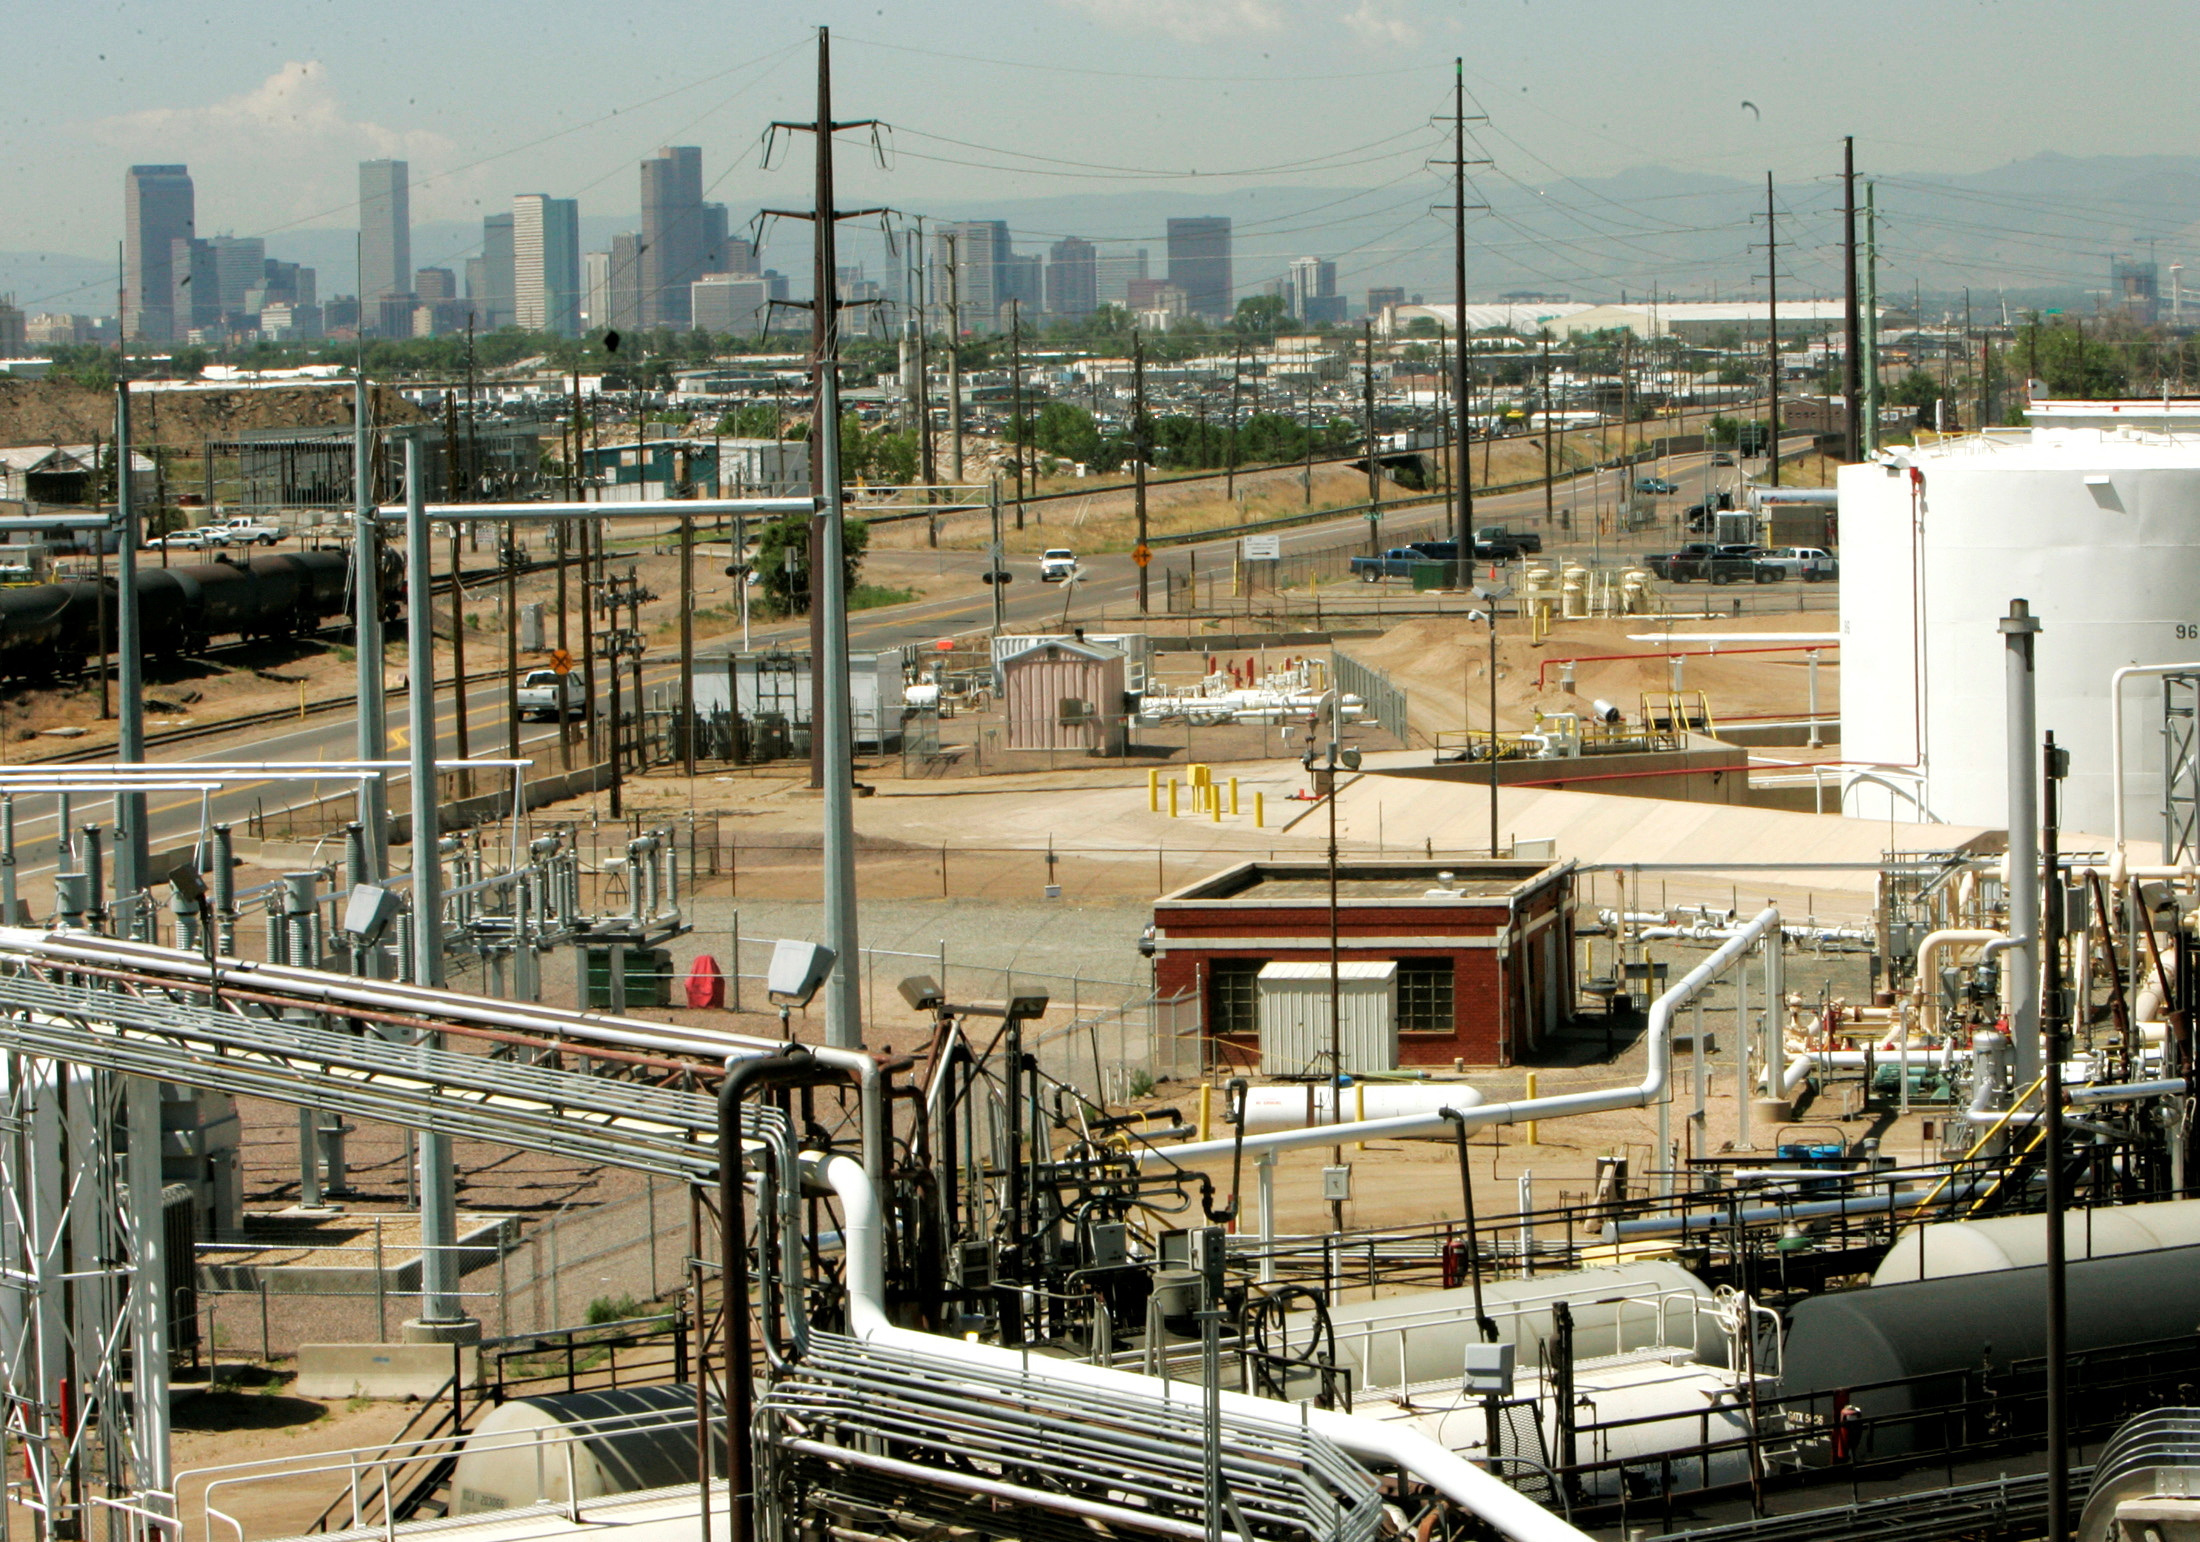 Downtown Denver is seen in the background from the Suncor Energy refinery in Denver